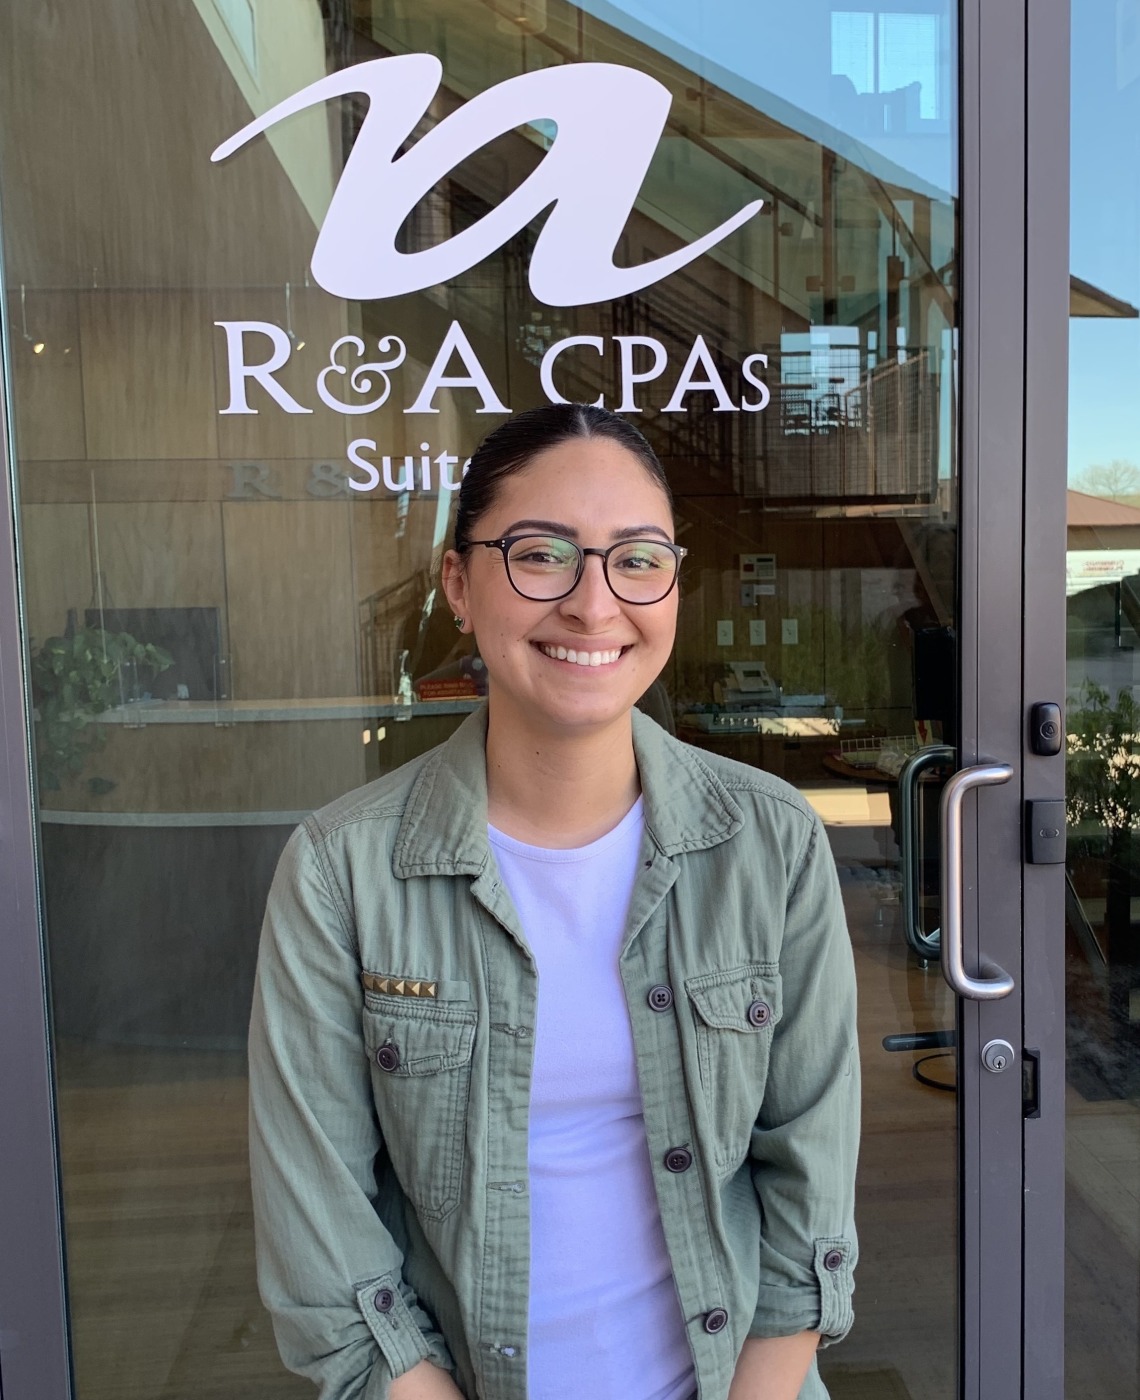 Dulce Tellez standing in front of glass door with R&A CPAs logo.